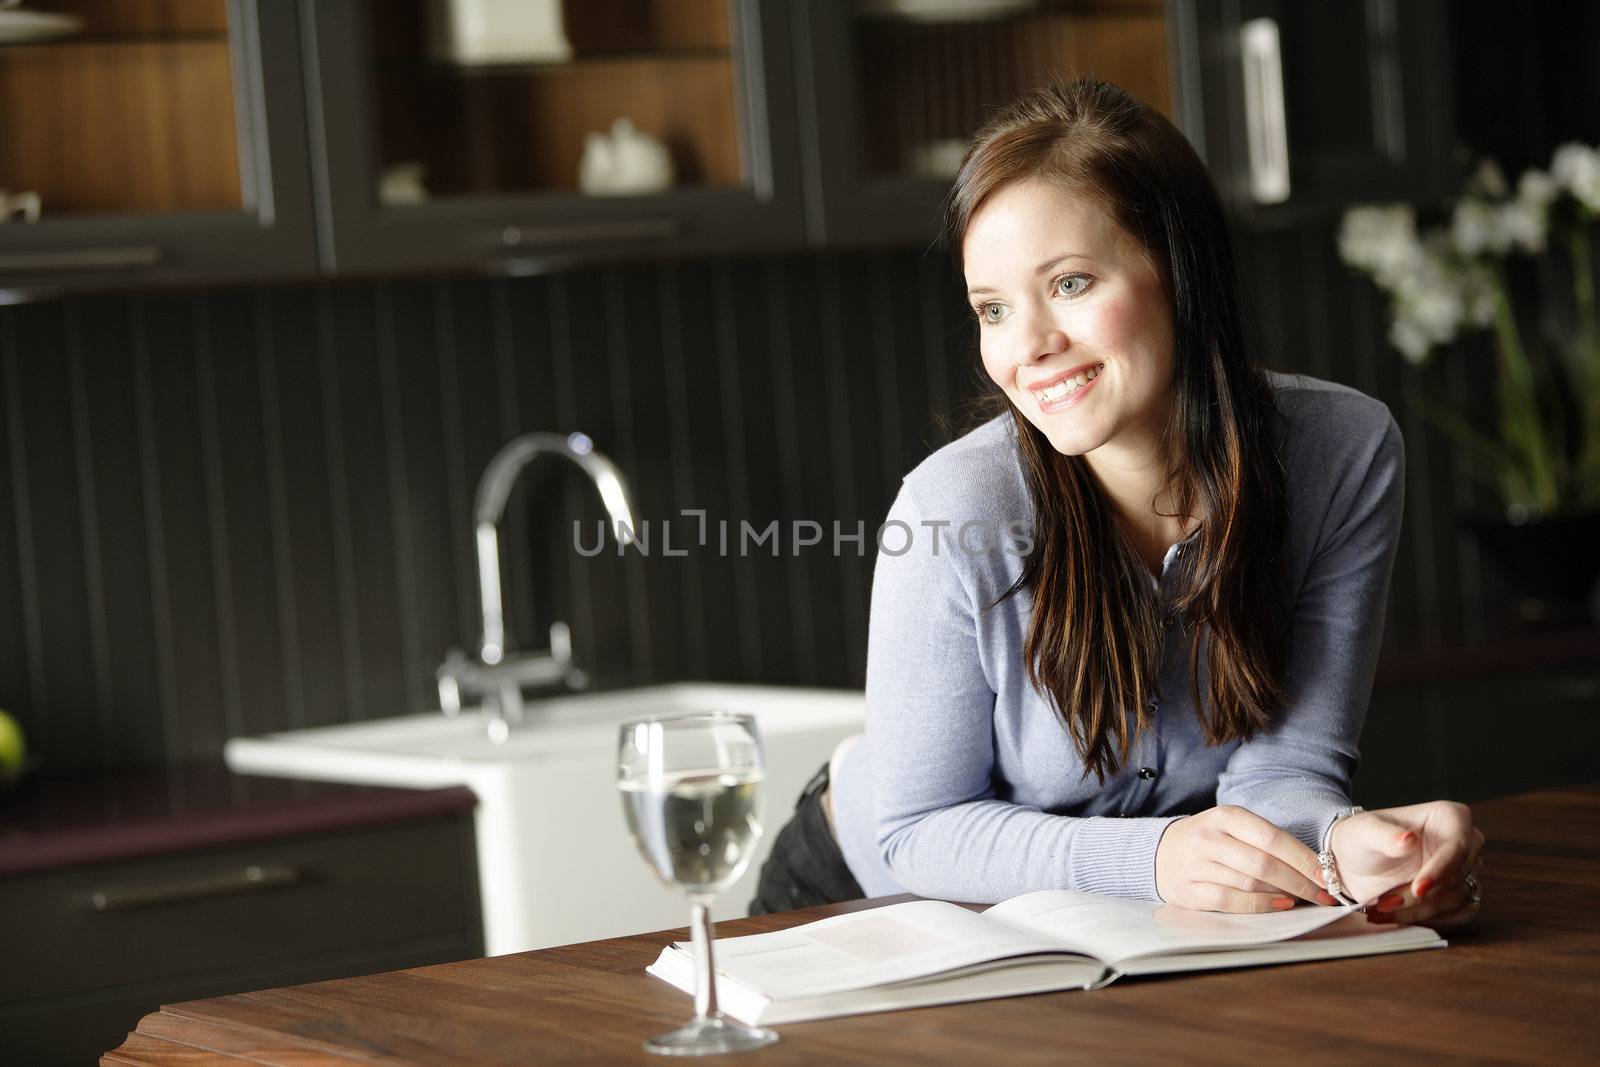 Attractive young woman reading a recipe from a cookery book in her kitchen with a glass of wine.